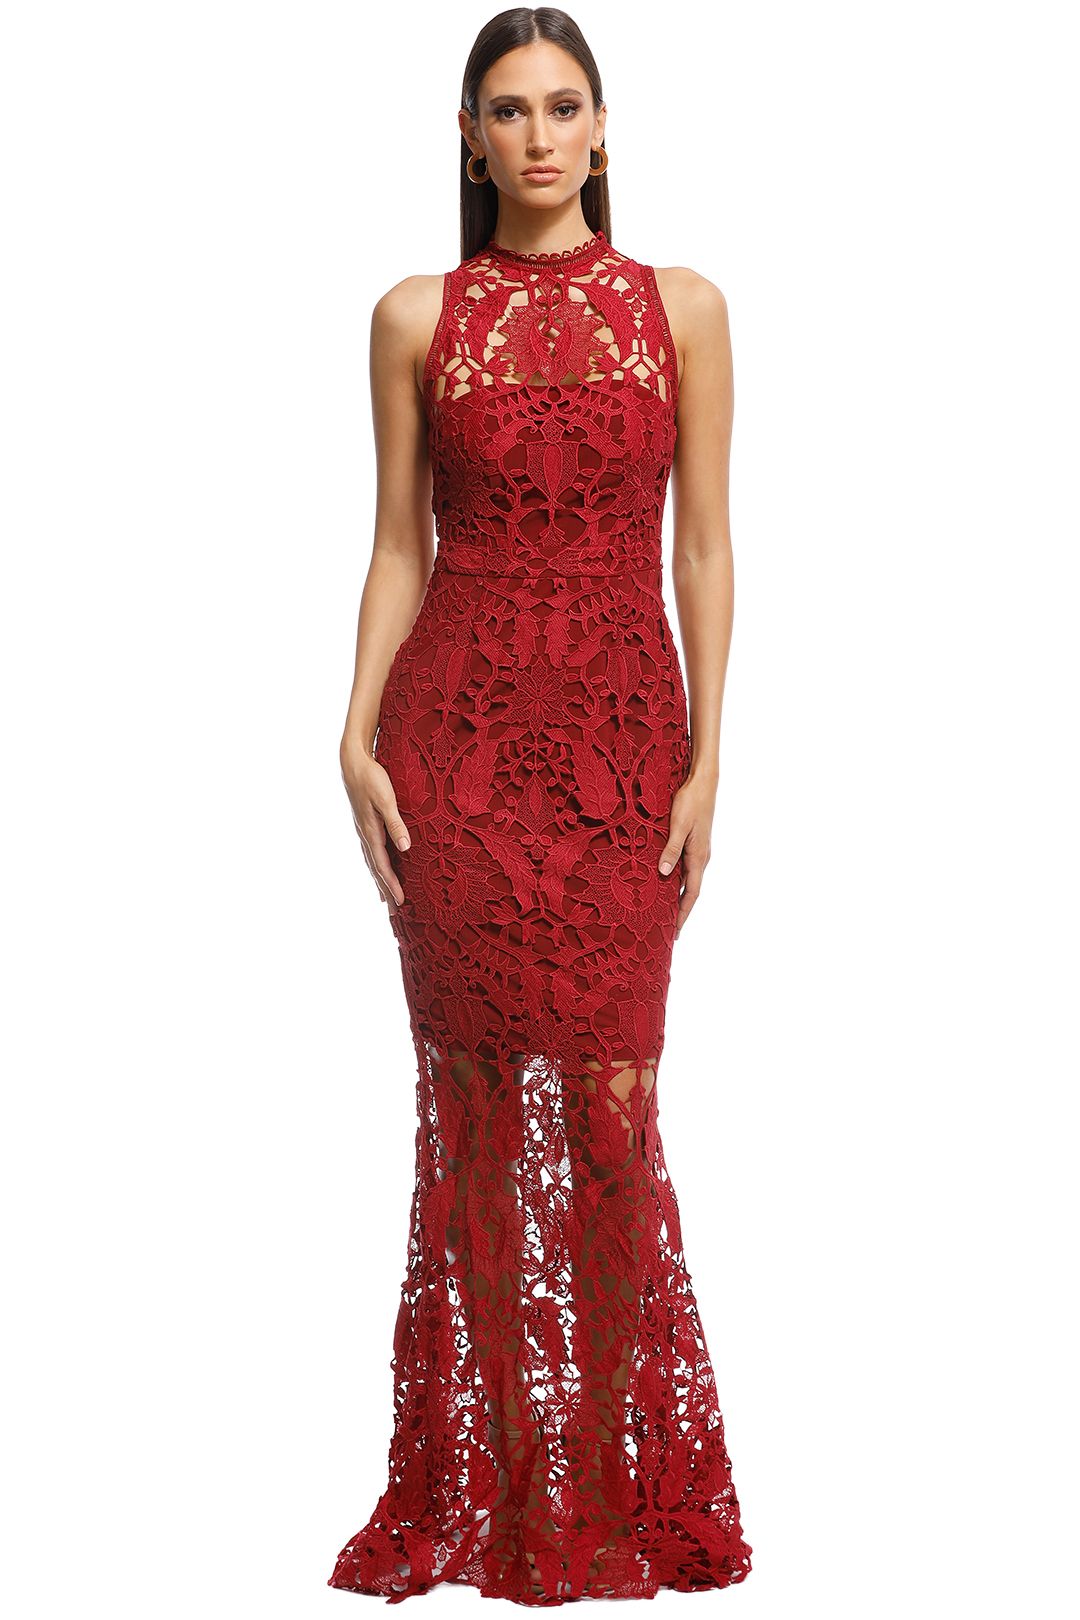 Grace and Hart - Prosecco Gown - Red - Front